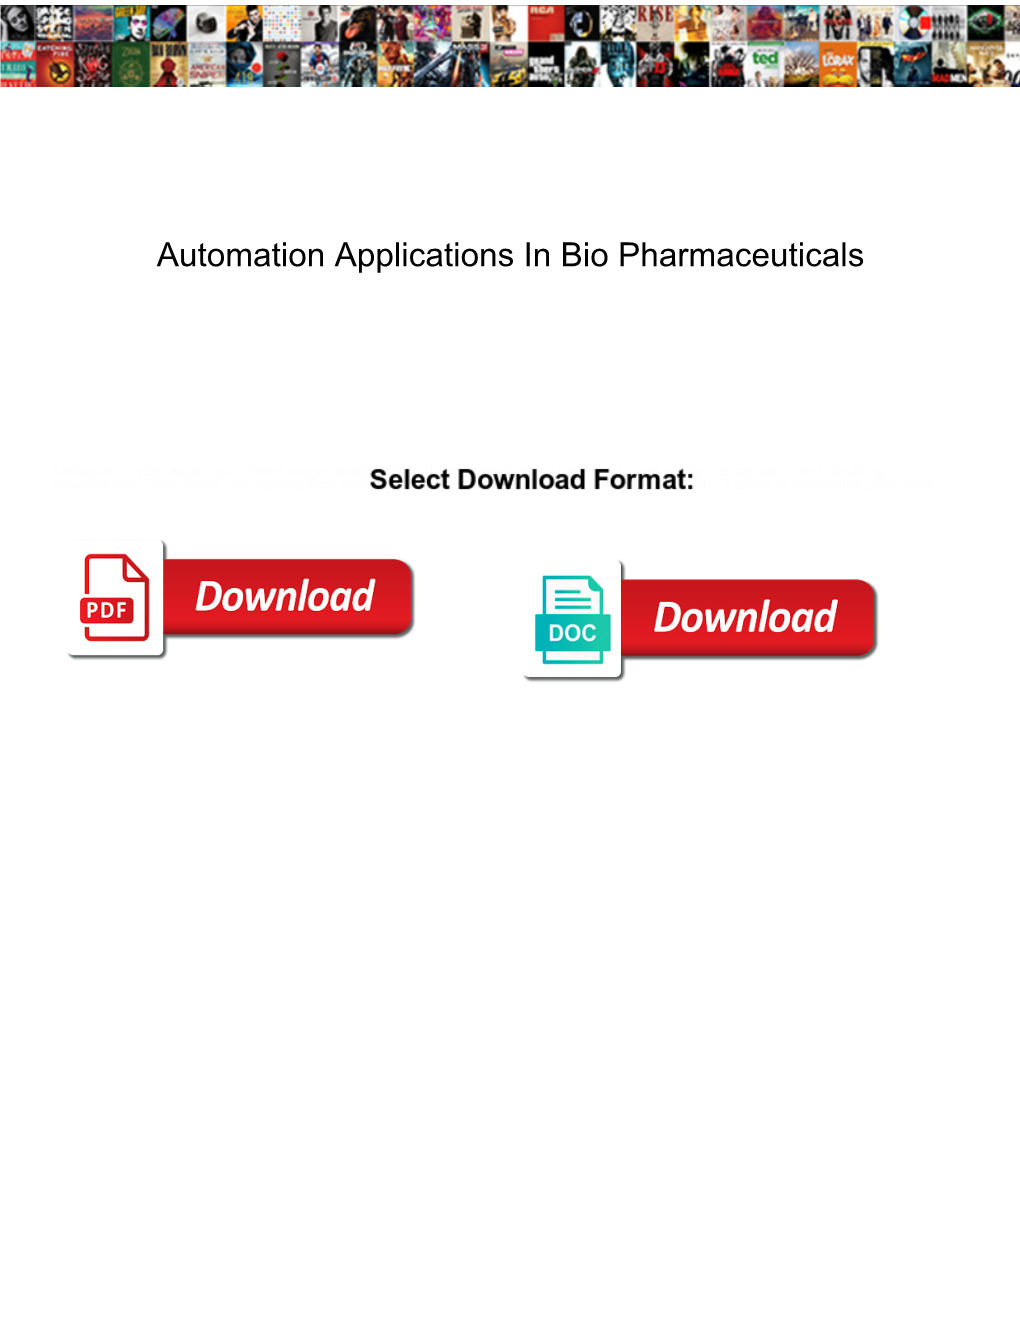 Automation Applications in Bio Pharmaceuticals